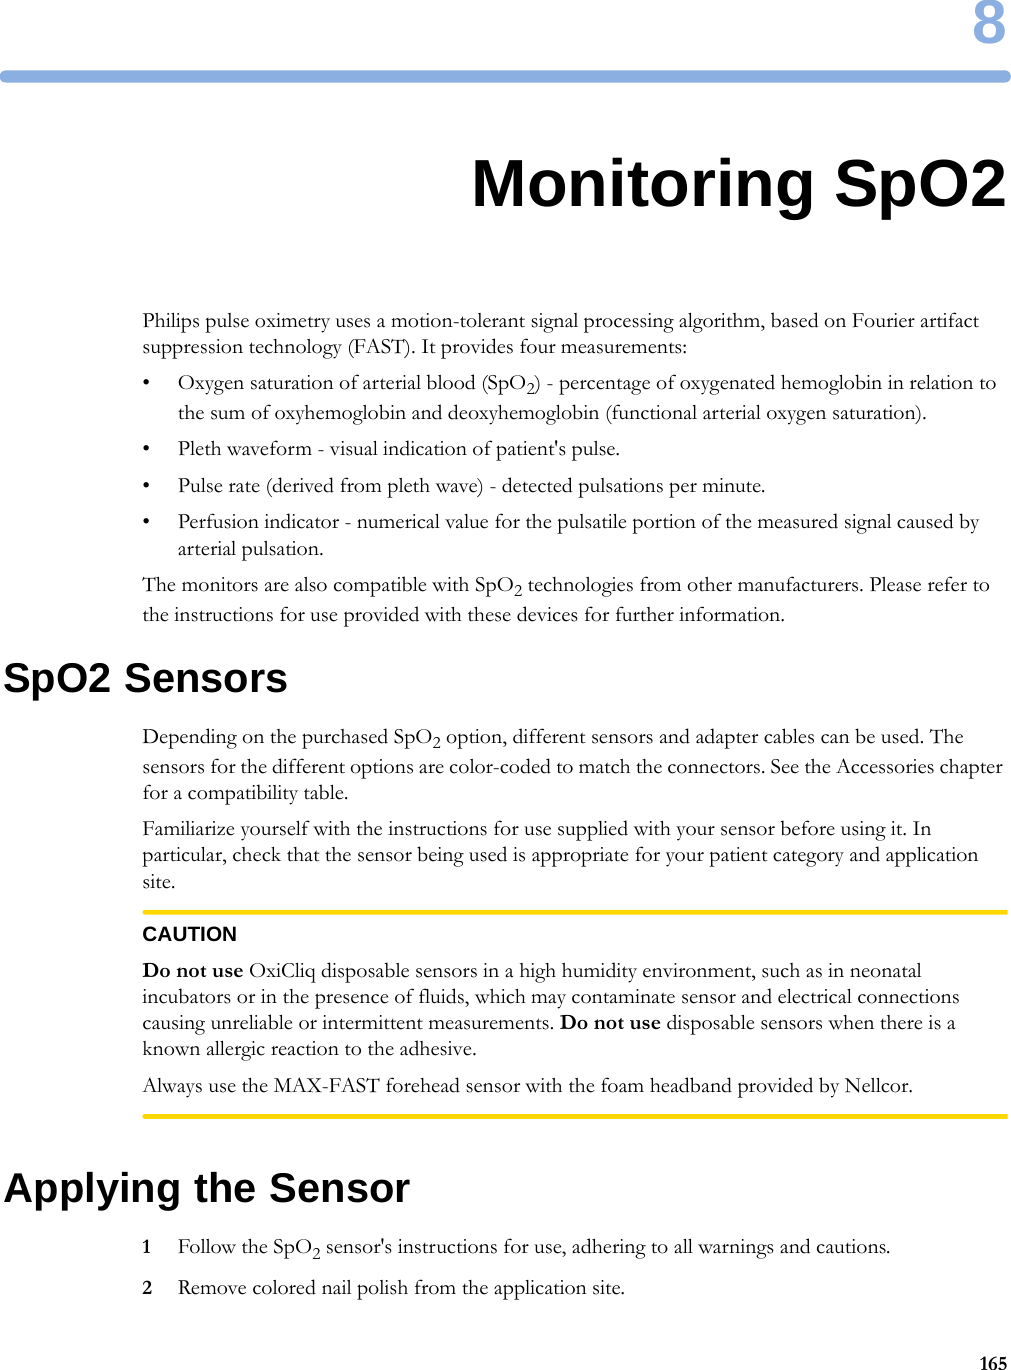 81658Monitoring SpO2Philips pulse oximetry uses a motion-tolerant signal processing algorithm, based on Fourier artifact suppression technology (FAST). It provides four measurements:• Oxygen saturation of arterial blood (SpO2) - percentage of oxygenated hemoglobin in relation to the sum of oxyhemoglobin and deoxyhemoglobin (functional arterial oxygen saturation).• Pleth waveform - visual indication of patient&apos;s pulse.• Pulse rate (derived from pleth wave) - detected pulsations per minute.• Perfusion indicator - numerical value for the pulsatile portion of the measured signal caused by arterial pulsation.The monitors are also compatible with SpO2 technologies from other manufacturers. Please refer to the instructions for use provided with these devices for further information.SpO2 SensorsDepending on the purchased SpO2 option, different sensors and adapter cables can be used. The sensors for the different options are color-coded to match the connectors. See the Accessories chapter for a compatibility table.Familiarize yourself with the instructions for use supplied with your sensor before using it. In particular, check that the sensor being used is appropriate for your patient category and application site.CAUTIONDo not use OxiCliq disposable sensors in a high humidity environment, such as in neonatal incubators or in the presence of fluids, which may contaminate sensor and electrical connections causing unreliable or intermittent measurements. Do not use disposable sensors when there is a known allergic reaction to the adhesive.Always use the MAX-FAST forehead sensor with the foam headband provided by Nellcor.Applying the Sensor1Follow the SpO2 sensor&apos;s instructions for use, adhering to all warnings and cautions.2Remove colored nail polish from the application site.